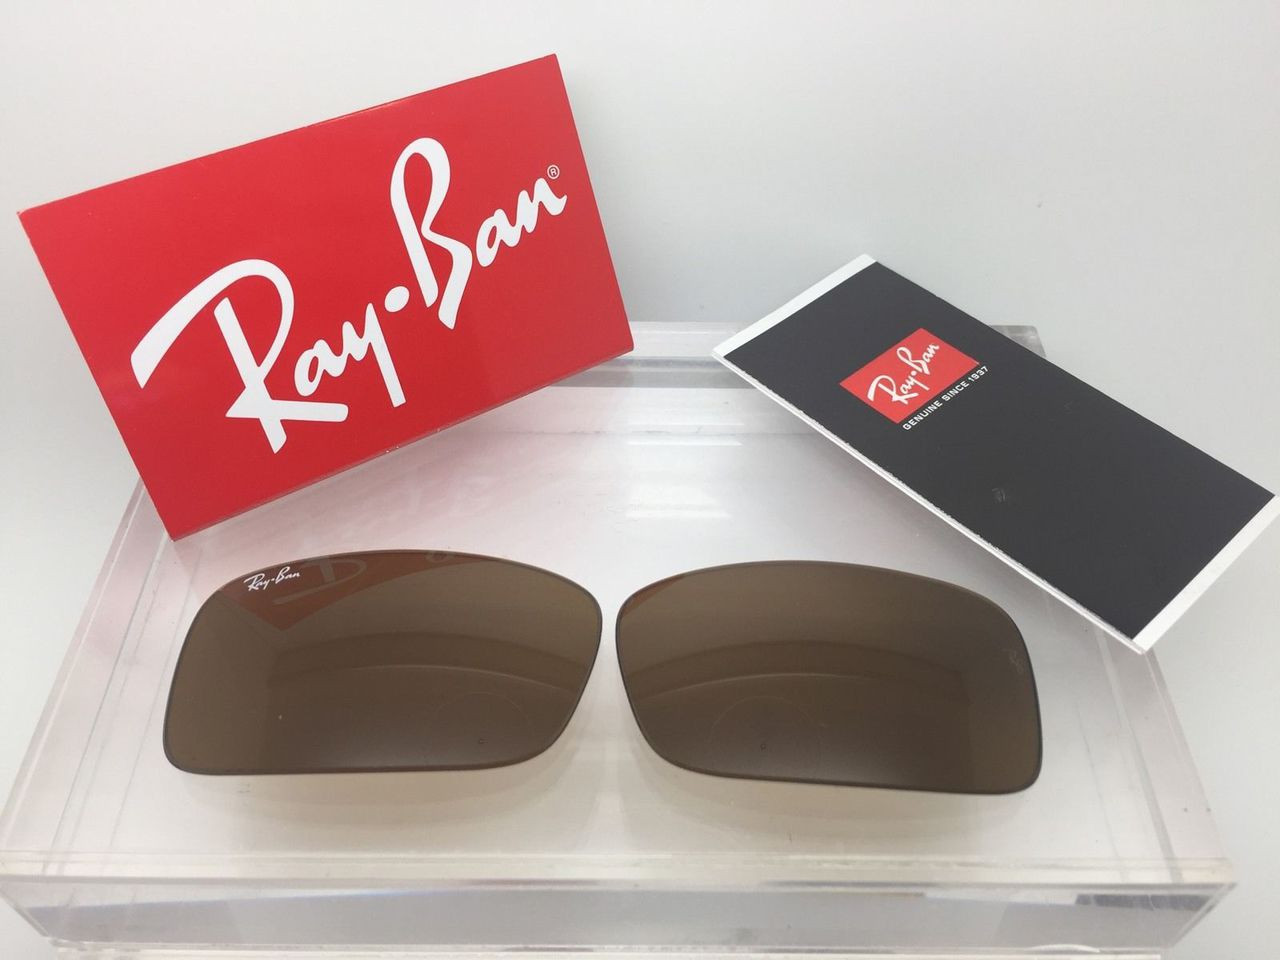 rb4151 replacement lenses